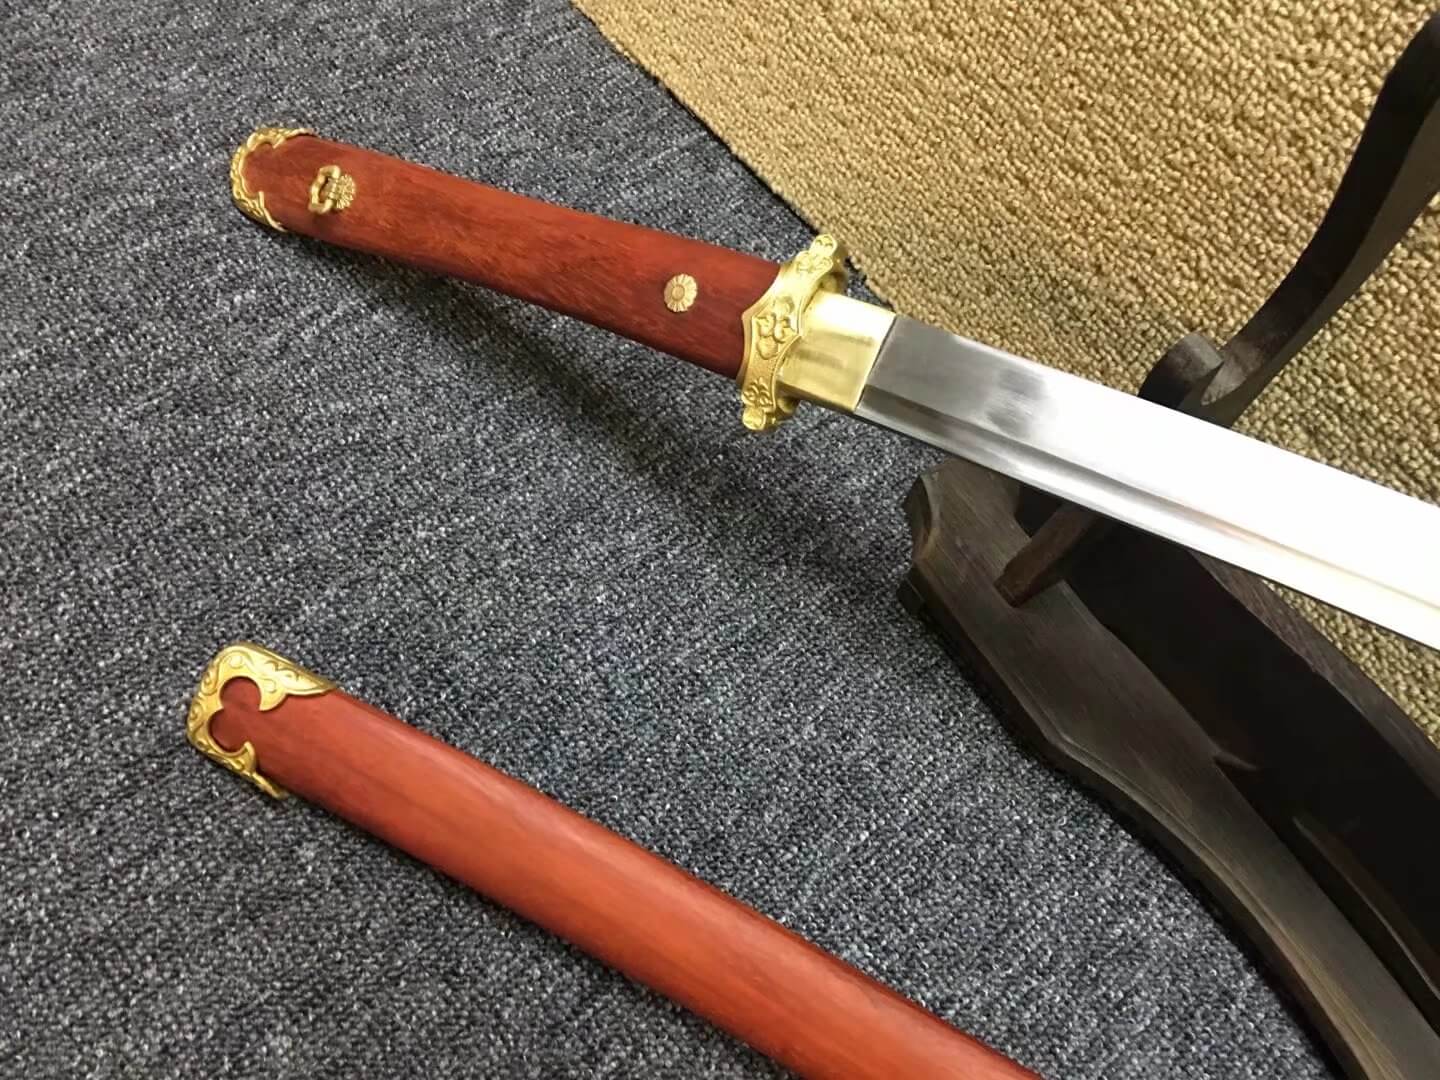 Bending Tang dao/T10 High Carbon Steel/Redwood scabbard/Brass fittings - Chinese sword shop